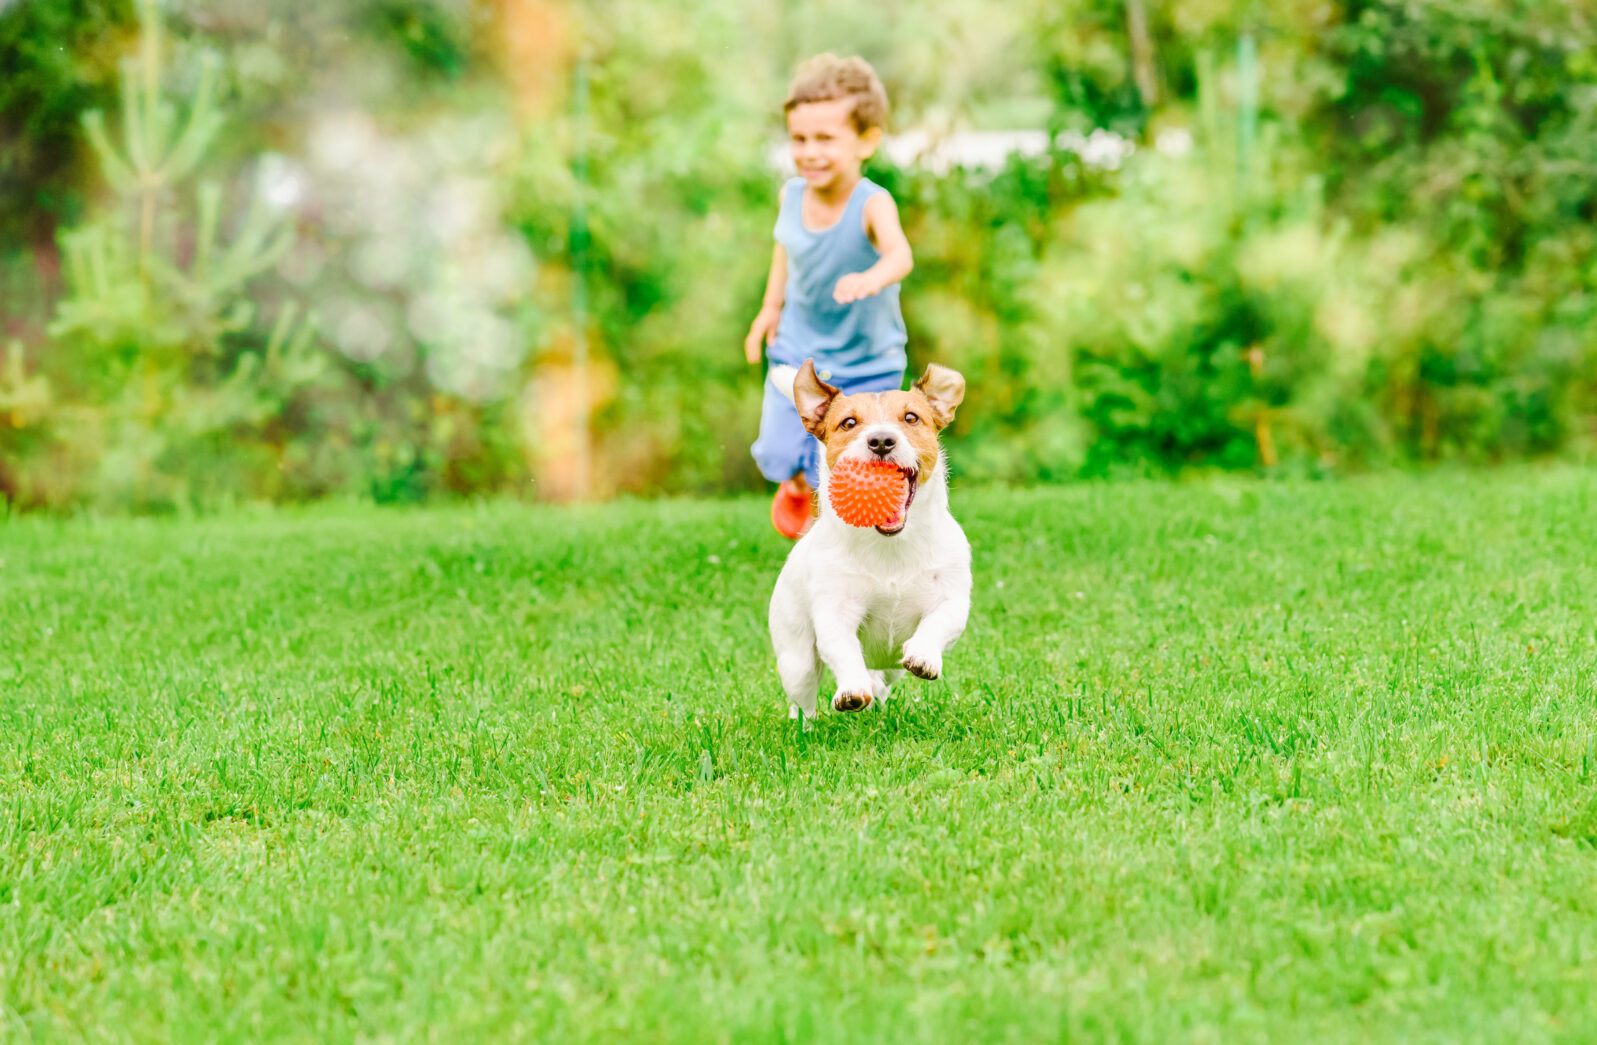 Dog with ball in mouth runs from kid playing chase game at summer lawn